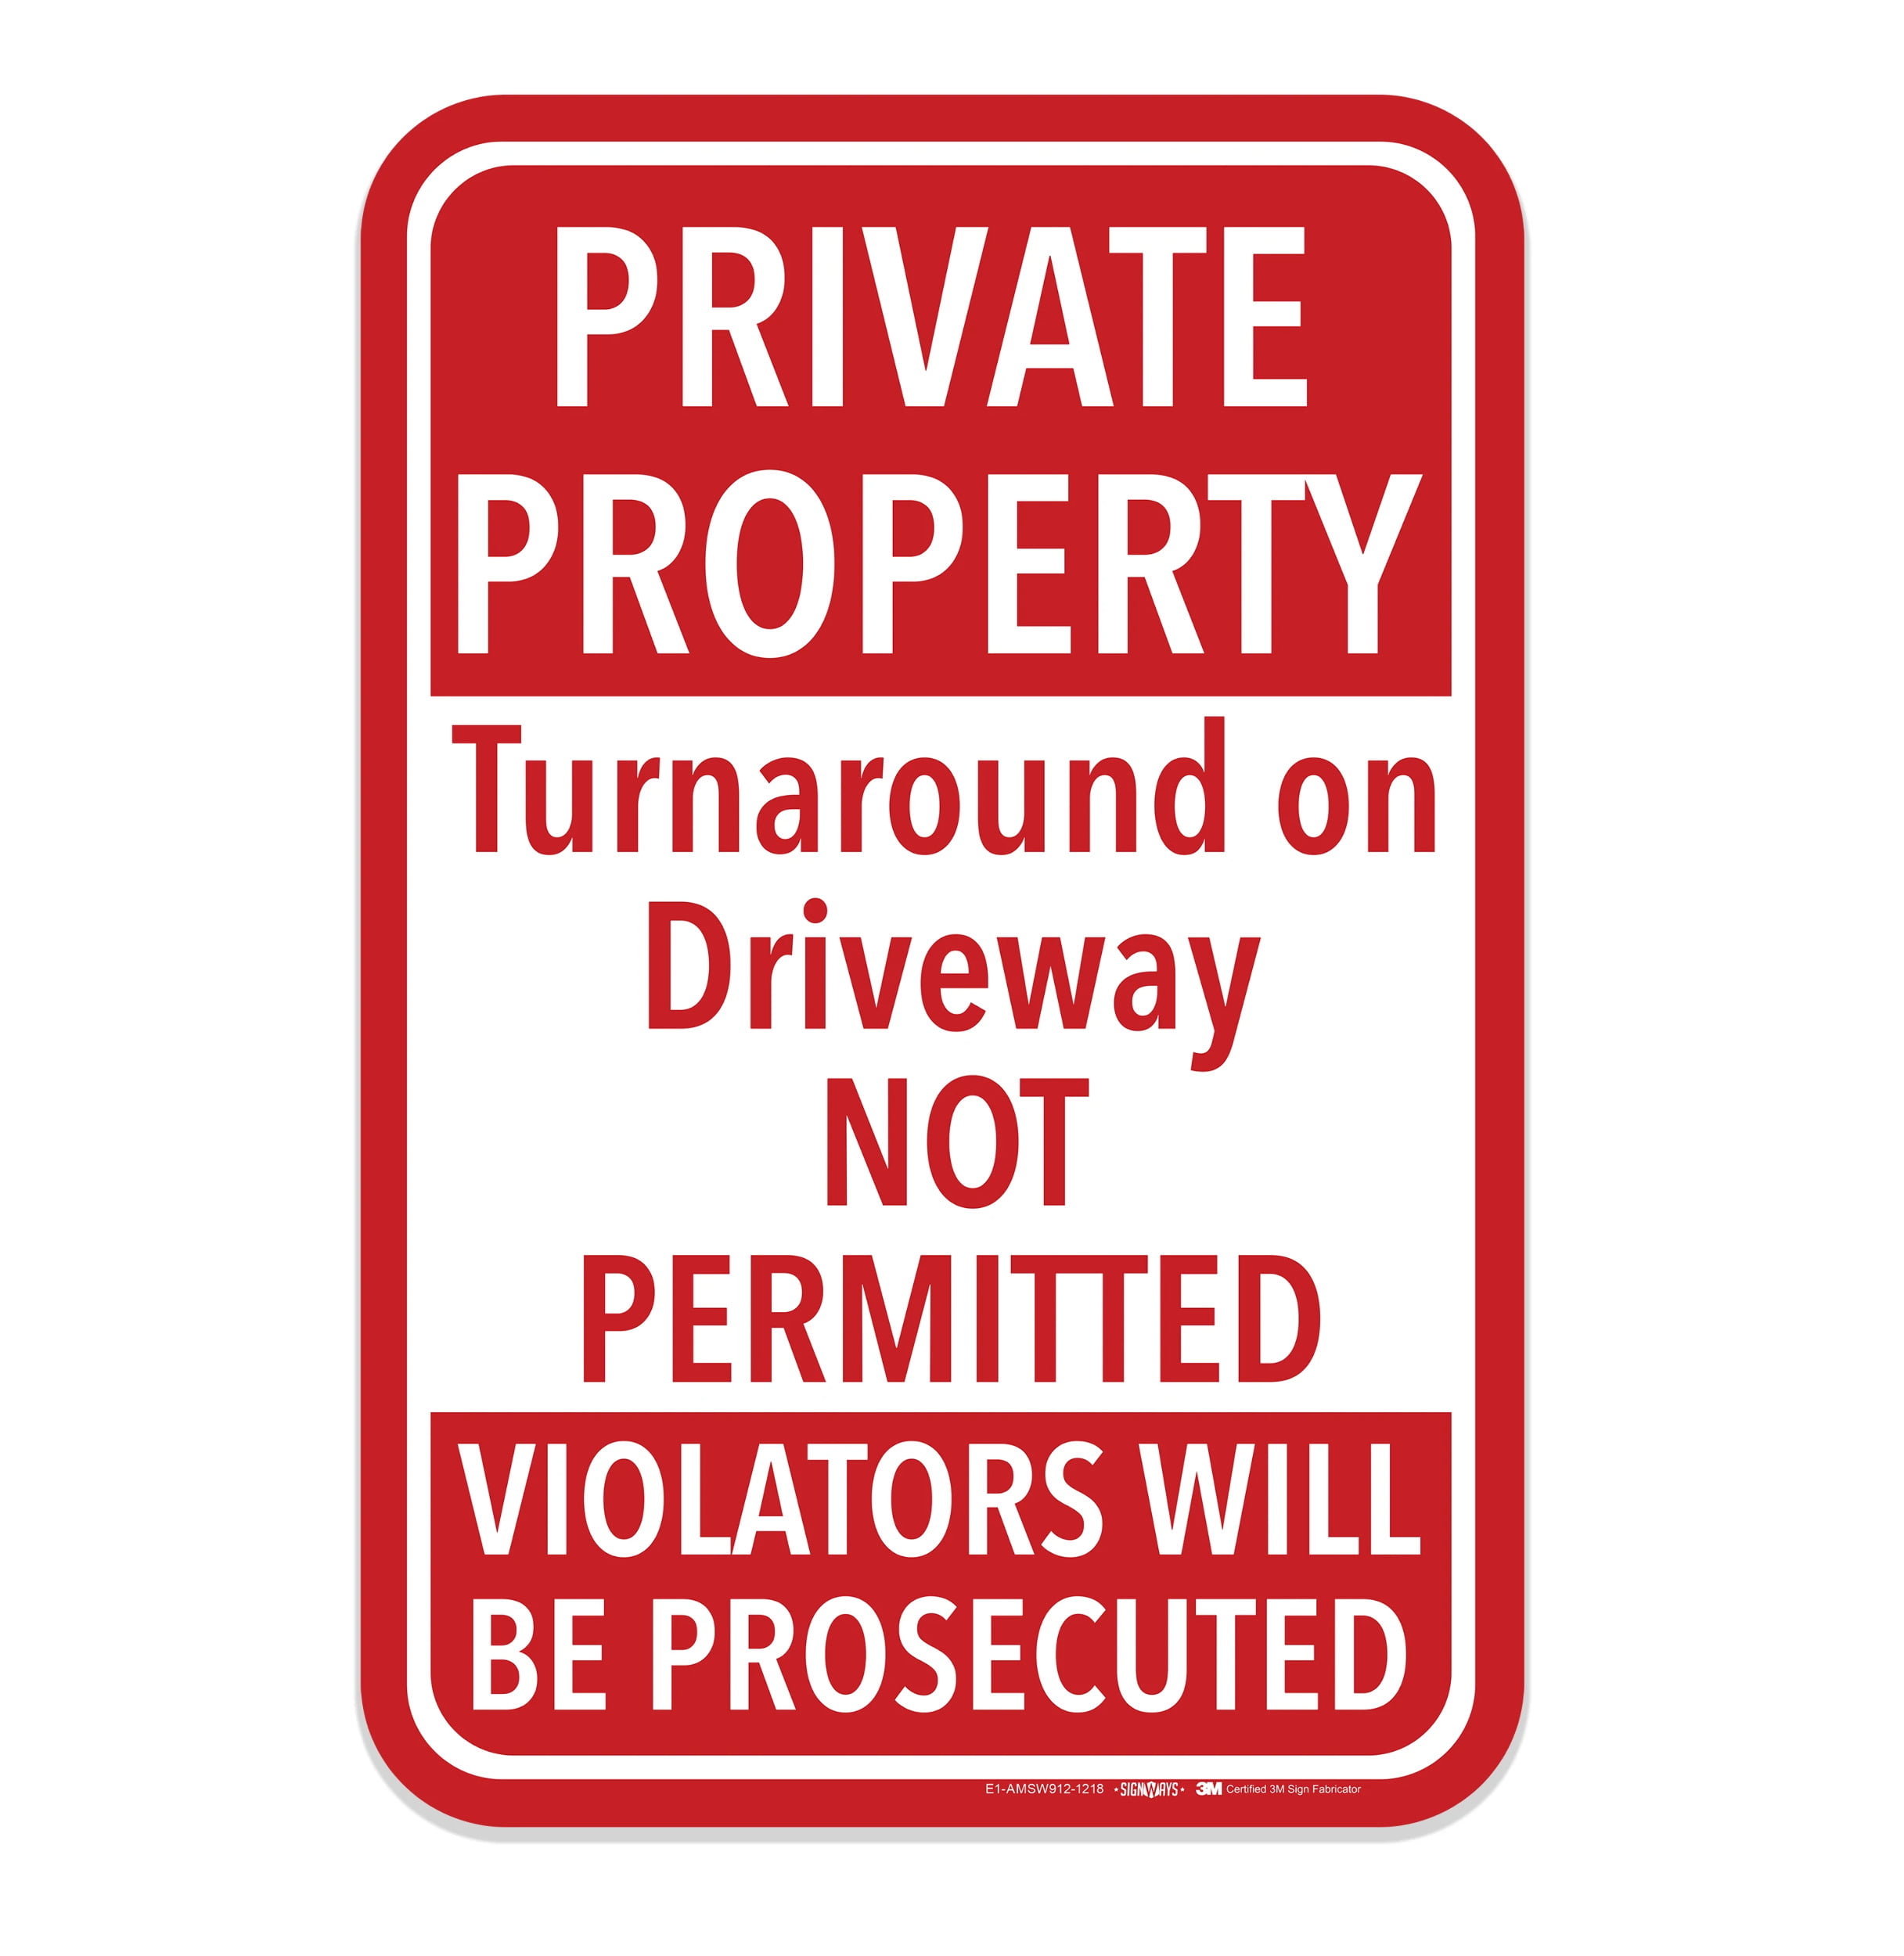 DO NOT ENTER PRIVATE DRIVEWAY Decal prohibited protection no entrance 